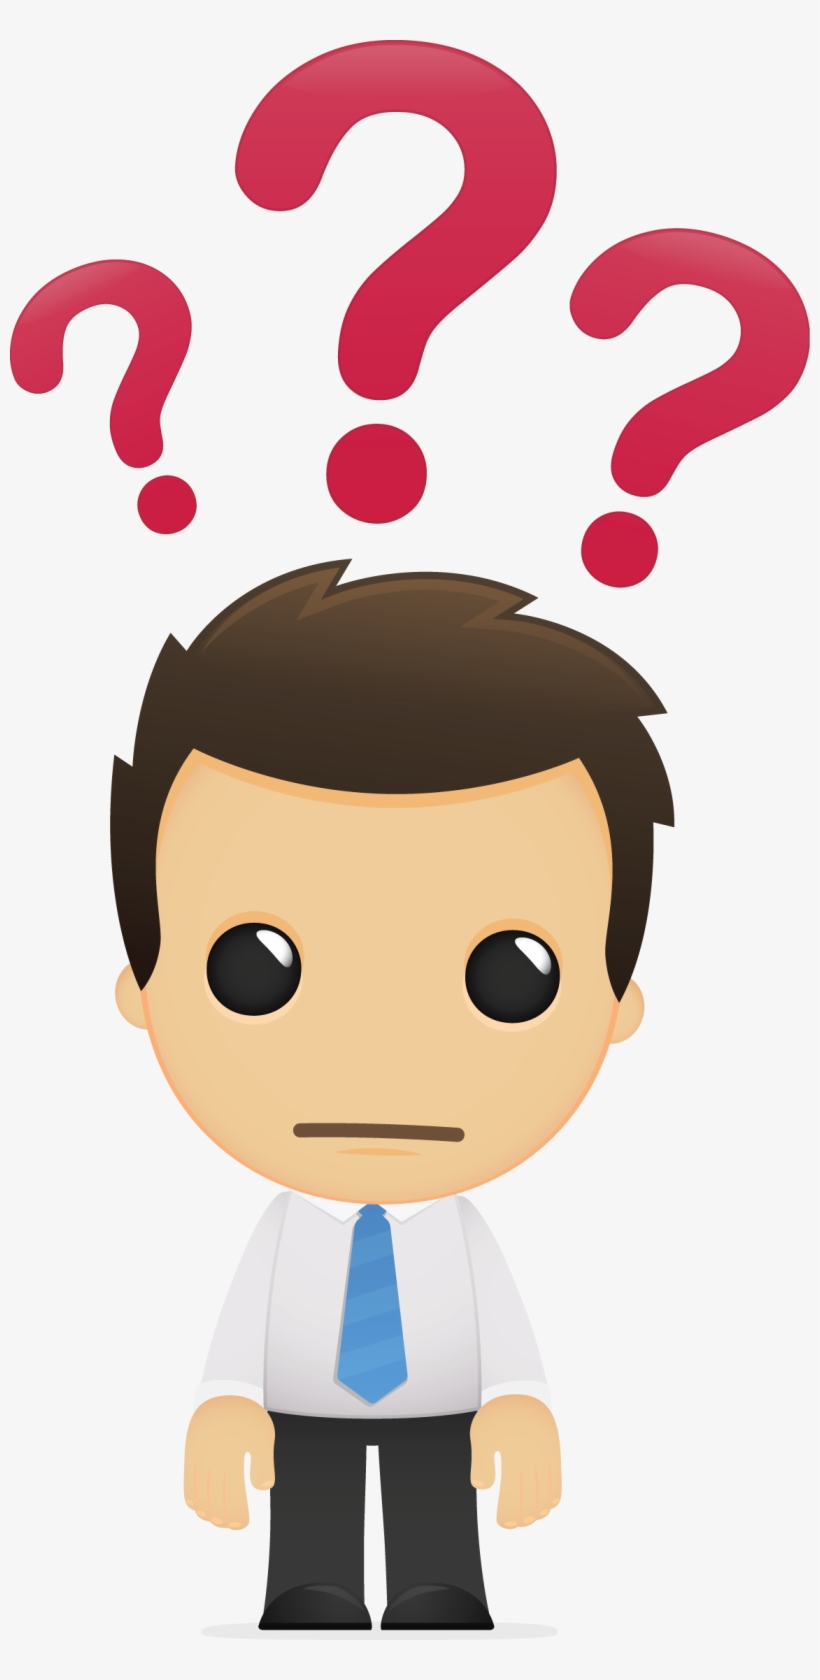 Question Mark Clipart Mar - Funny Cartoon Office Worker, transparent png #6187799